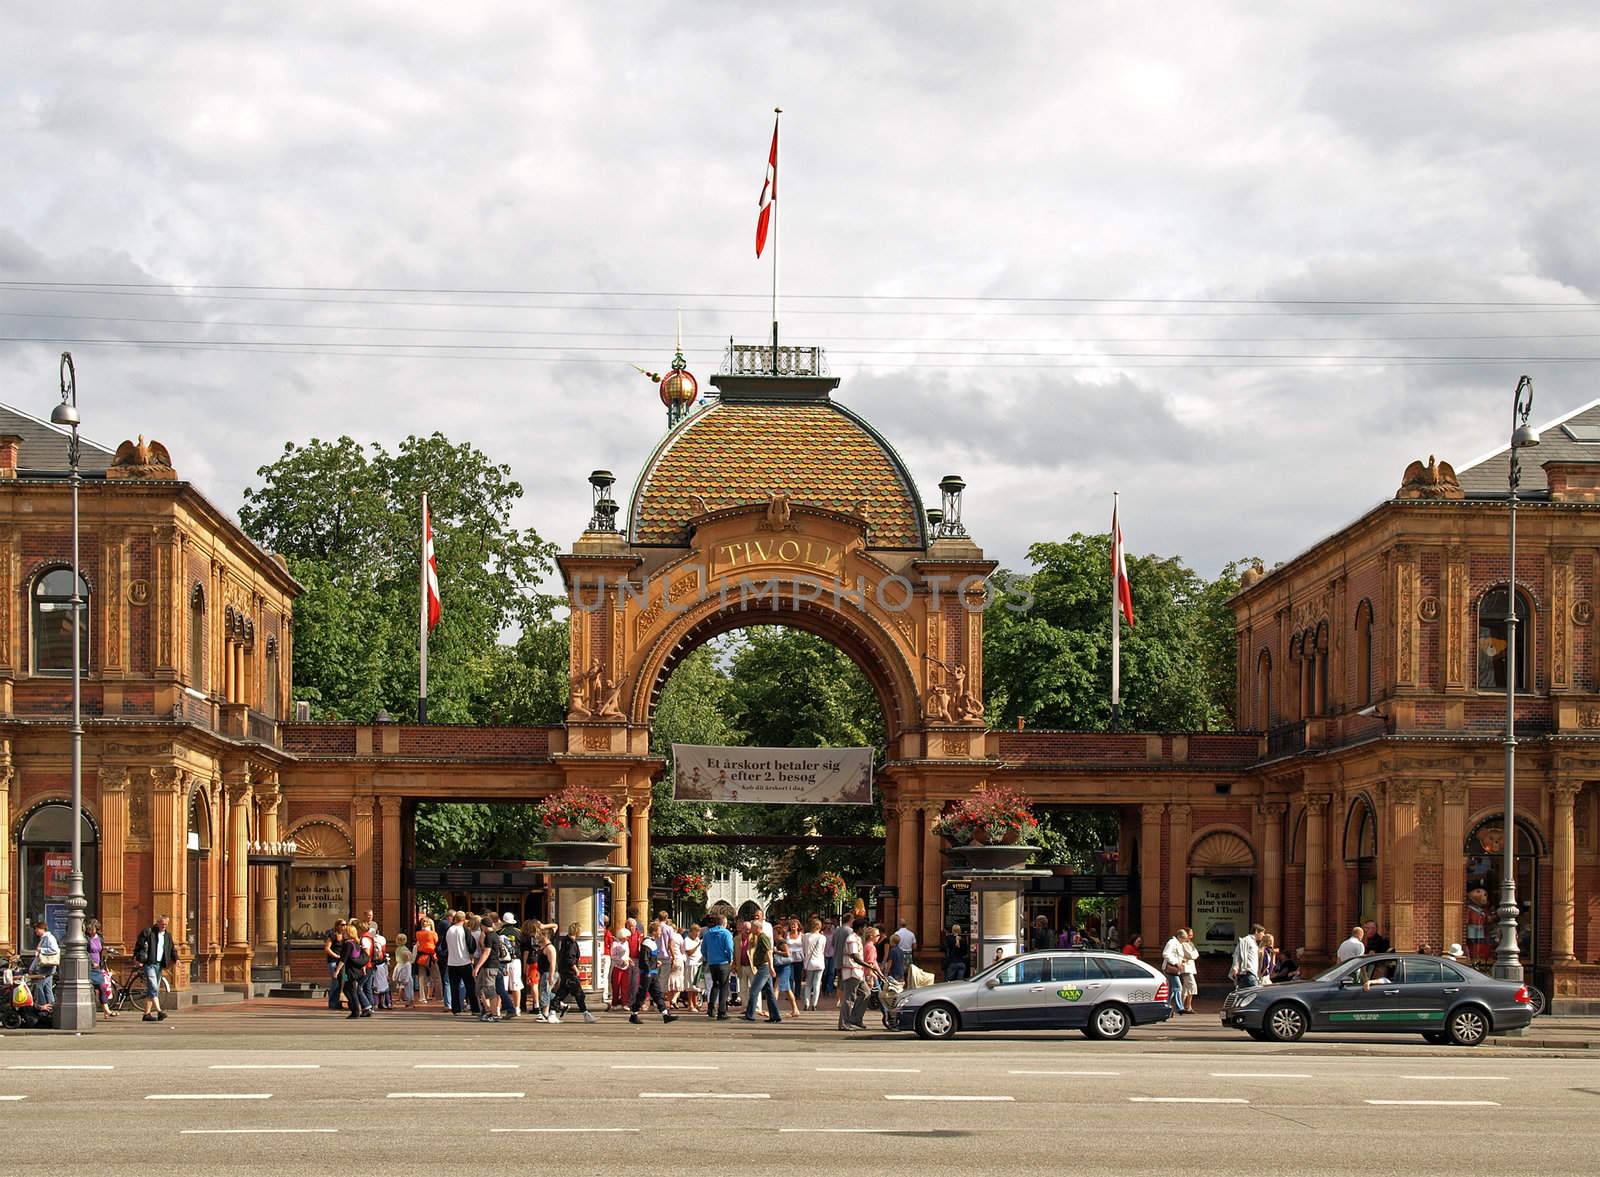 TIVOLI, COPENHAGEN - JULY 19: Tivoli Gardens entrance, July 19, 2009. Built in 1843, it is the most famous amusement park in Denmark. It is a place of enjoyment and recreation for tourists and Danes.